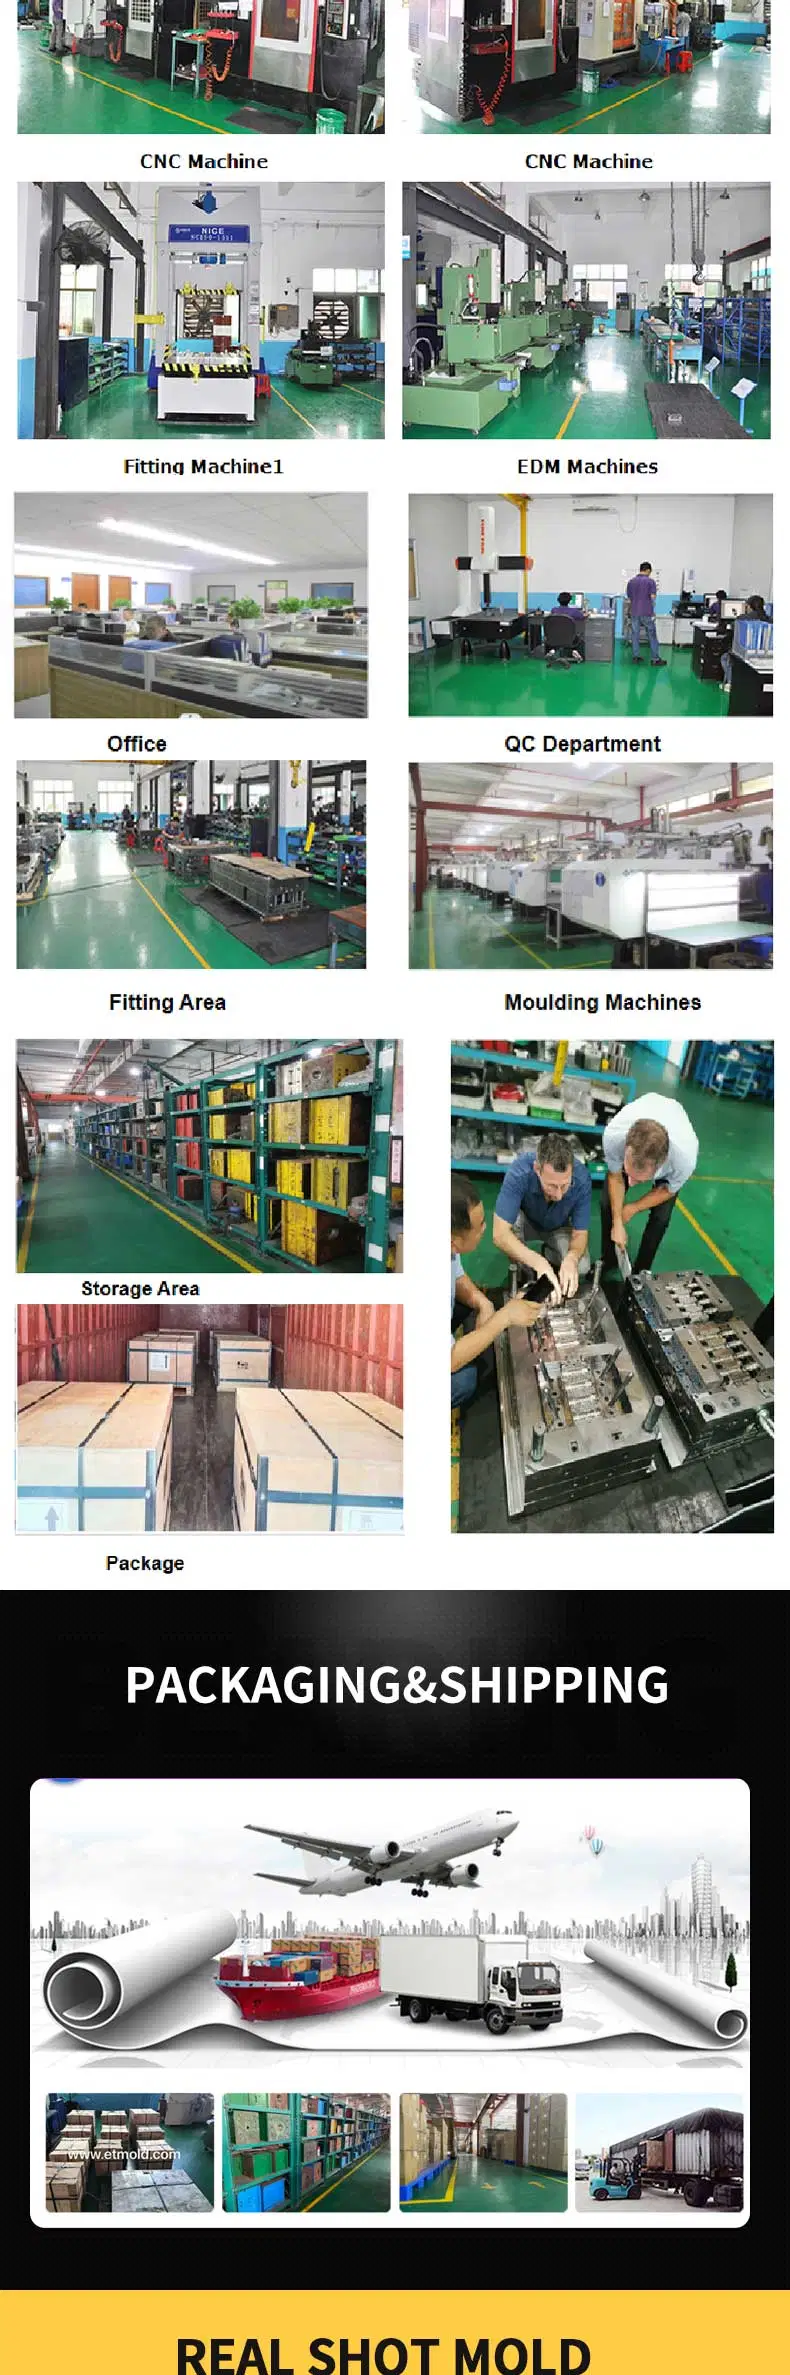 High Precision Quality Moulding Injection Molding Dies Mould Parts Mold Maker Cover Injection Moulding Die